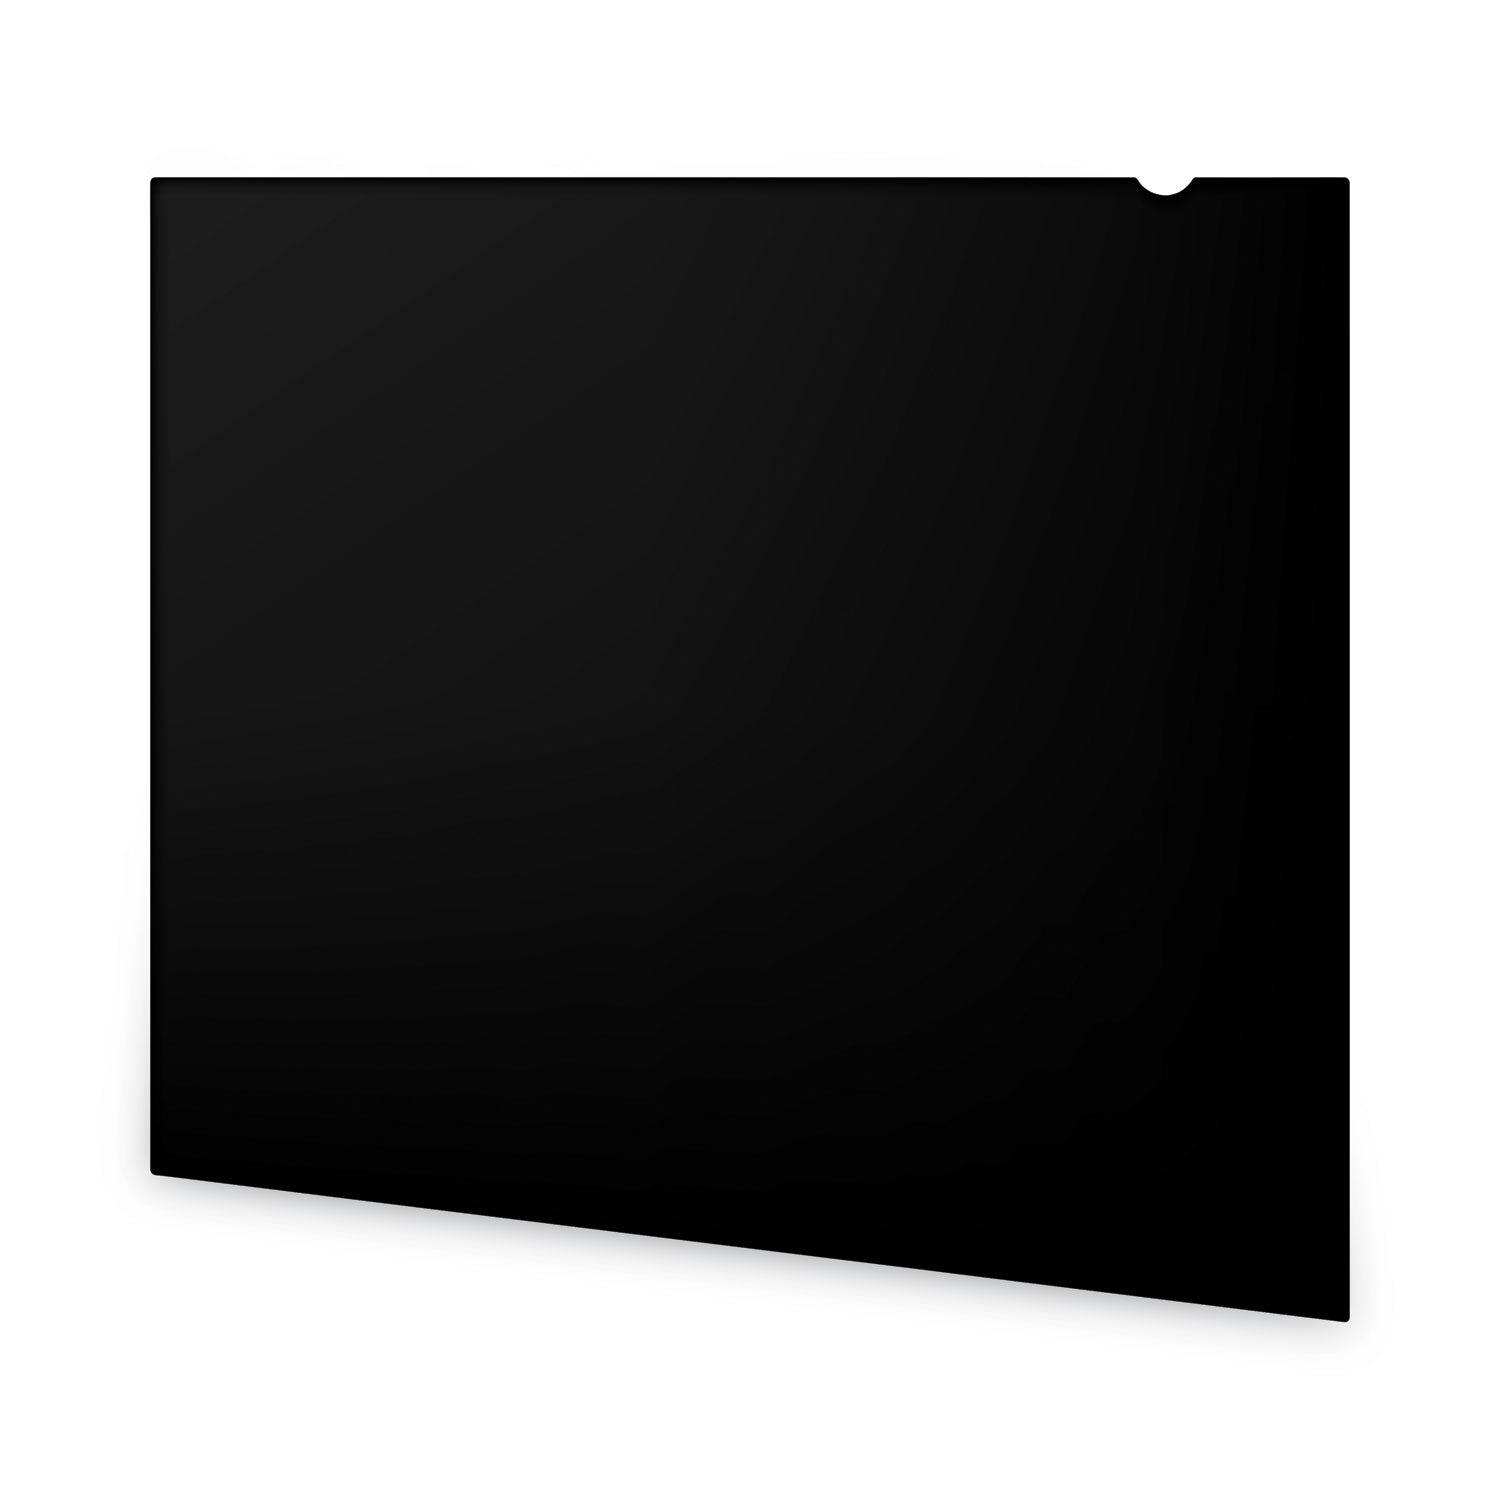 Blackout Privacy Filter for 23" Widescreen Flat Panel Monitor, 16:9 Aspect Ratio - 